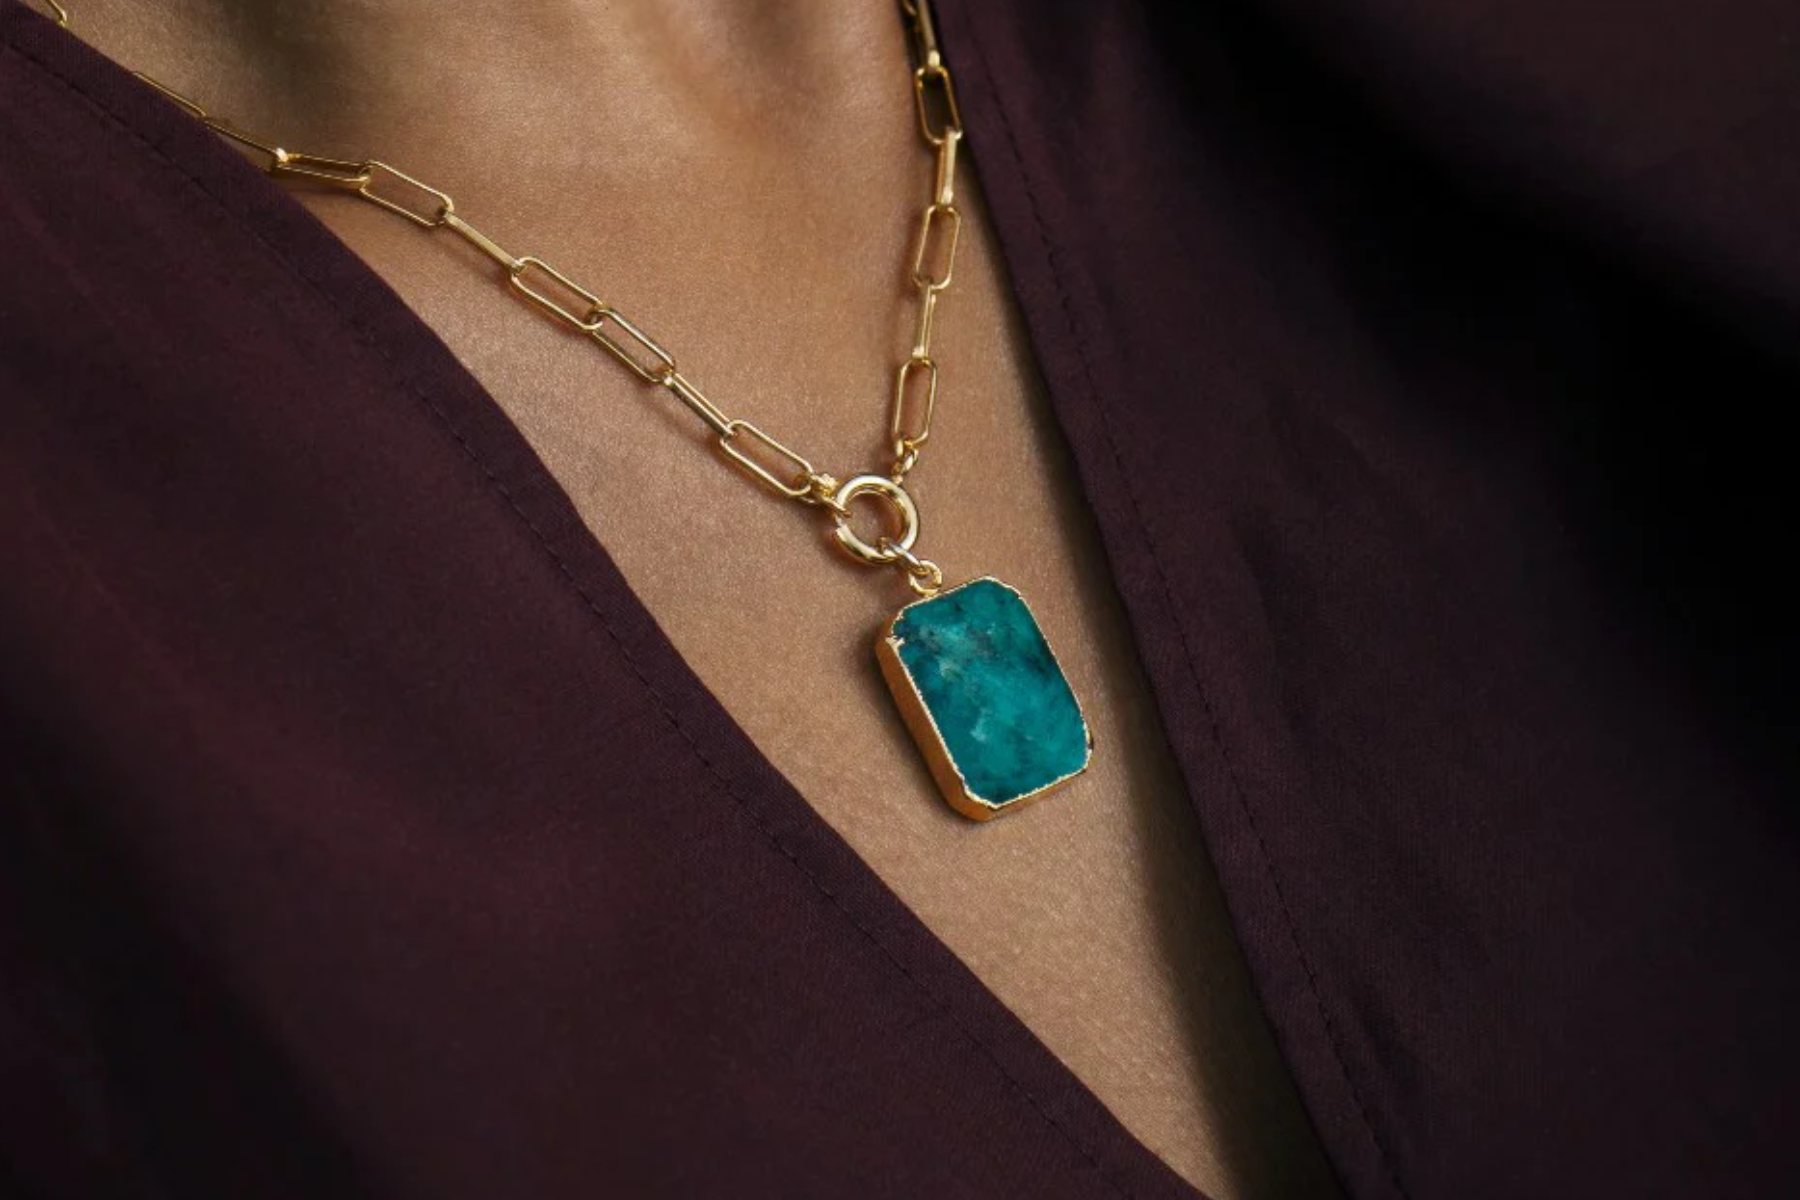 A woman wearing a necklace with a blue birthstone